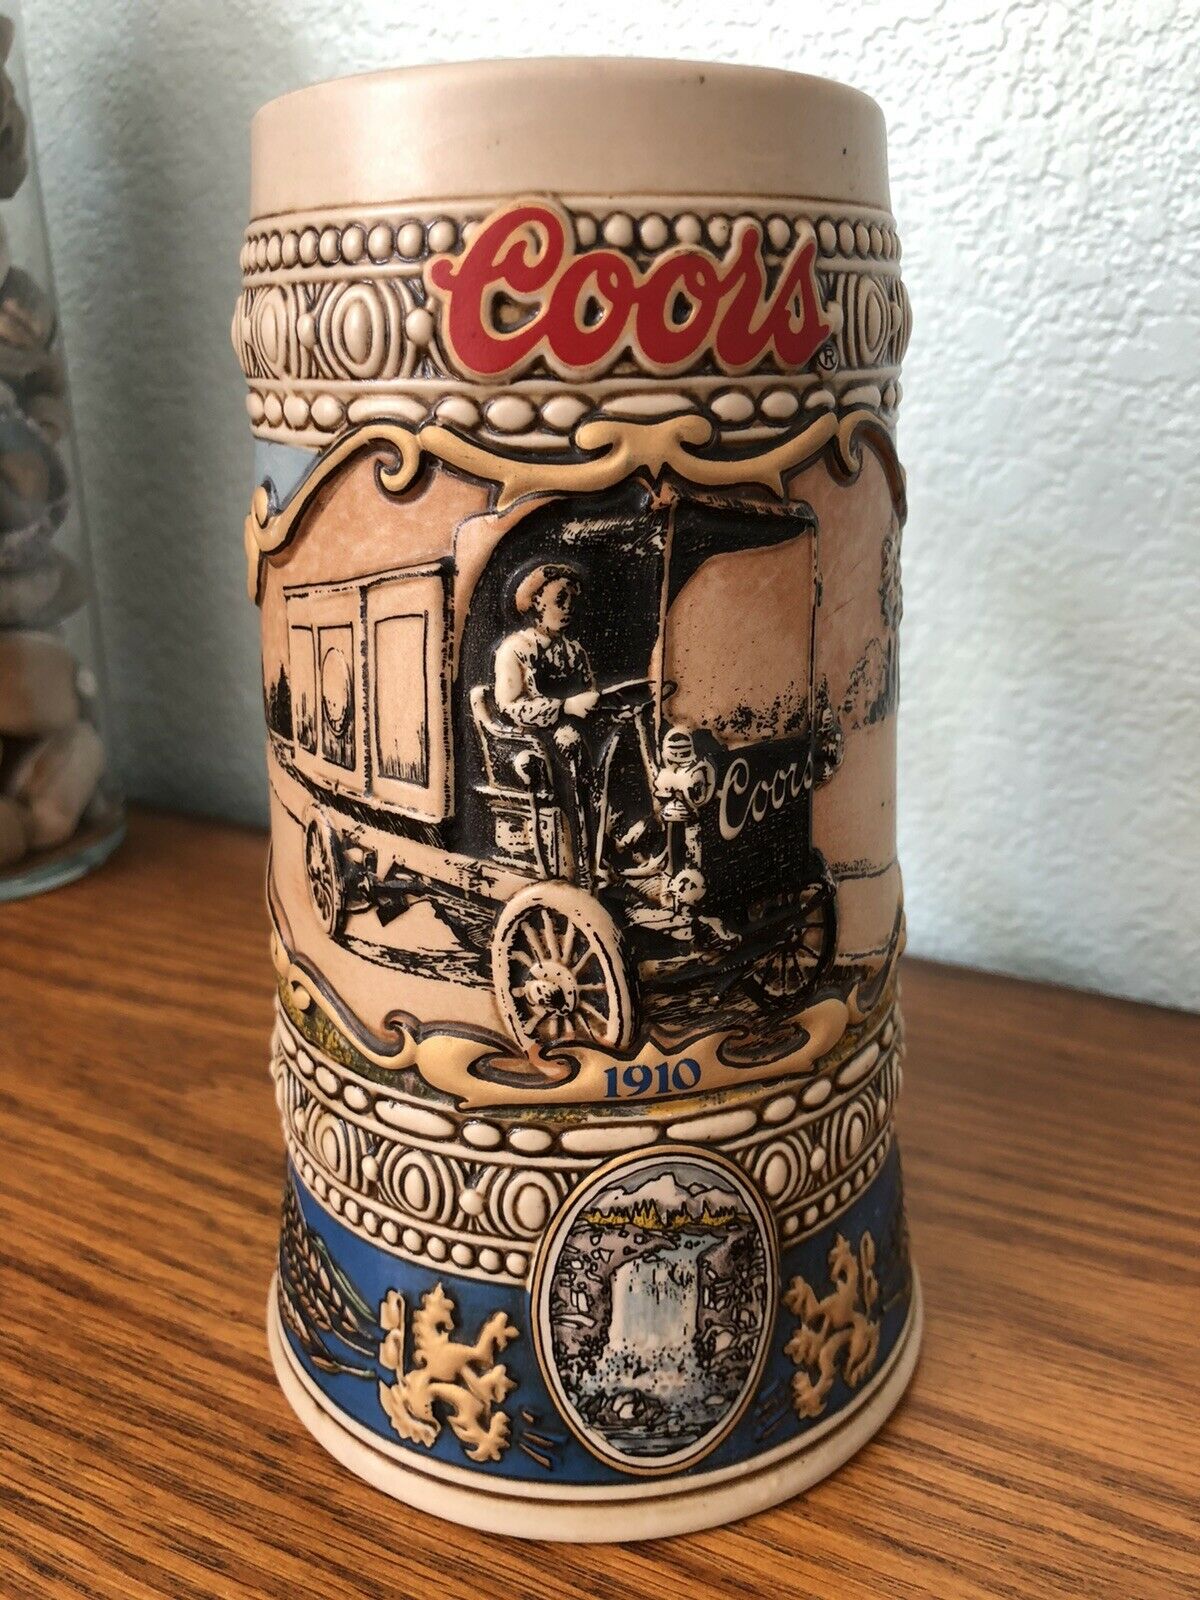 Coors Beer Stein (1910 Beer Truck) Made In Brazil 1989 - Numbered. Excellent!